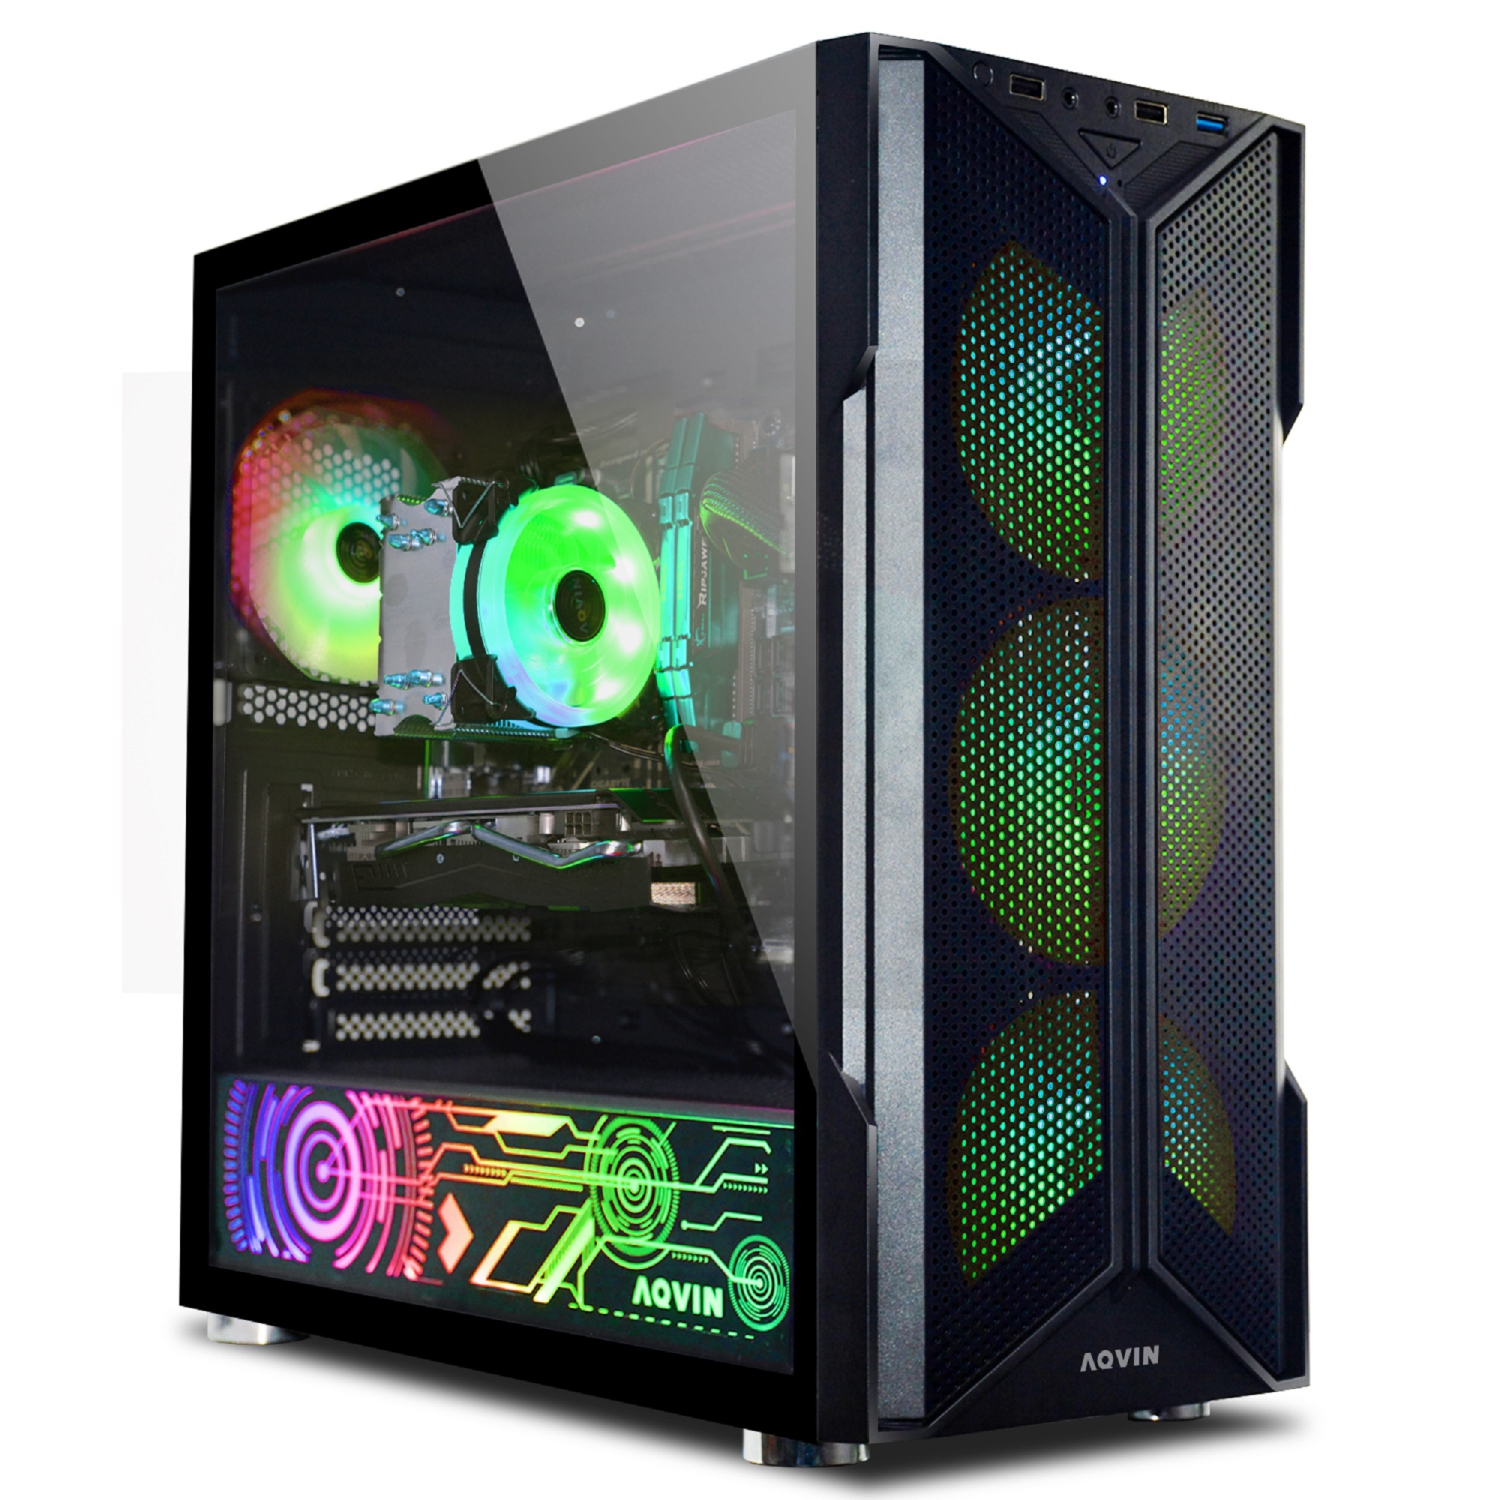 AQVIN-AQ20 Gaming PC Tower Desktop Computer Intel Core i5 up to 4.00 GHz 32GB DDR4 RAM 2TB SSD Storage GeForce RTX 3050 8GB Windows 11 Gaming Keyboard and Mouse WIFI